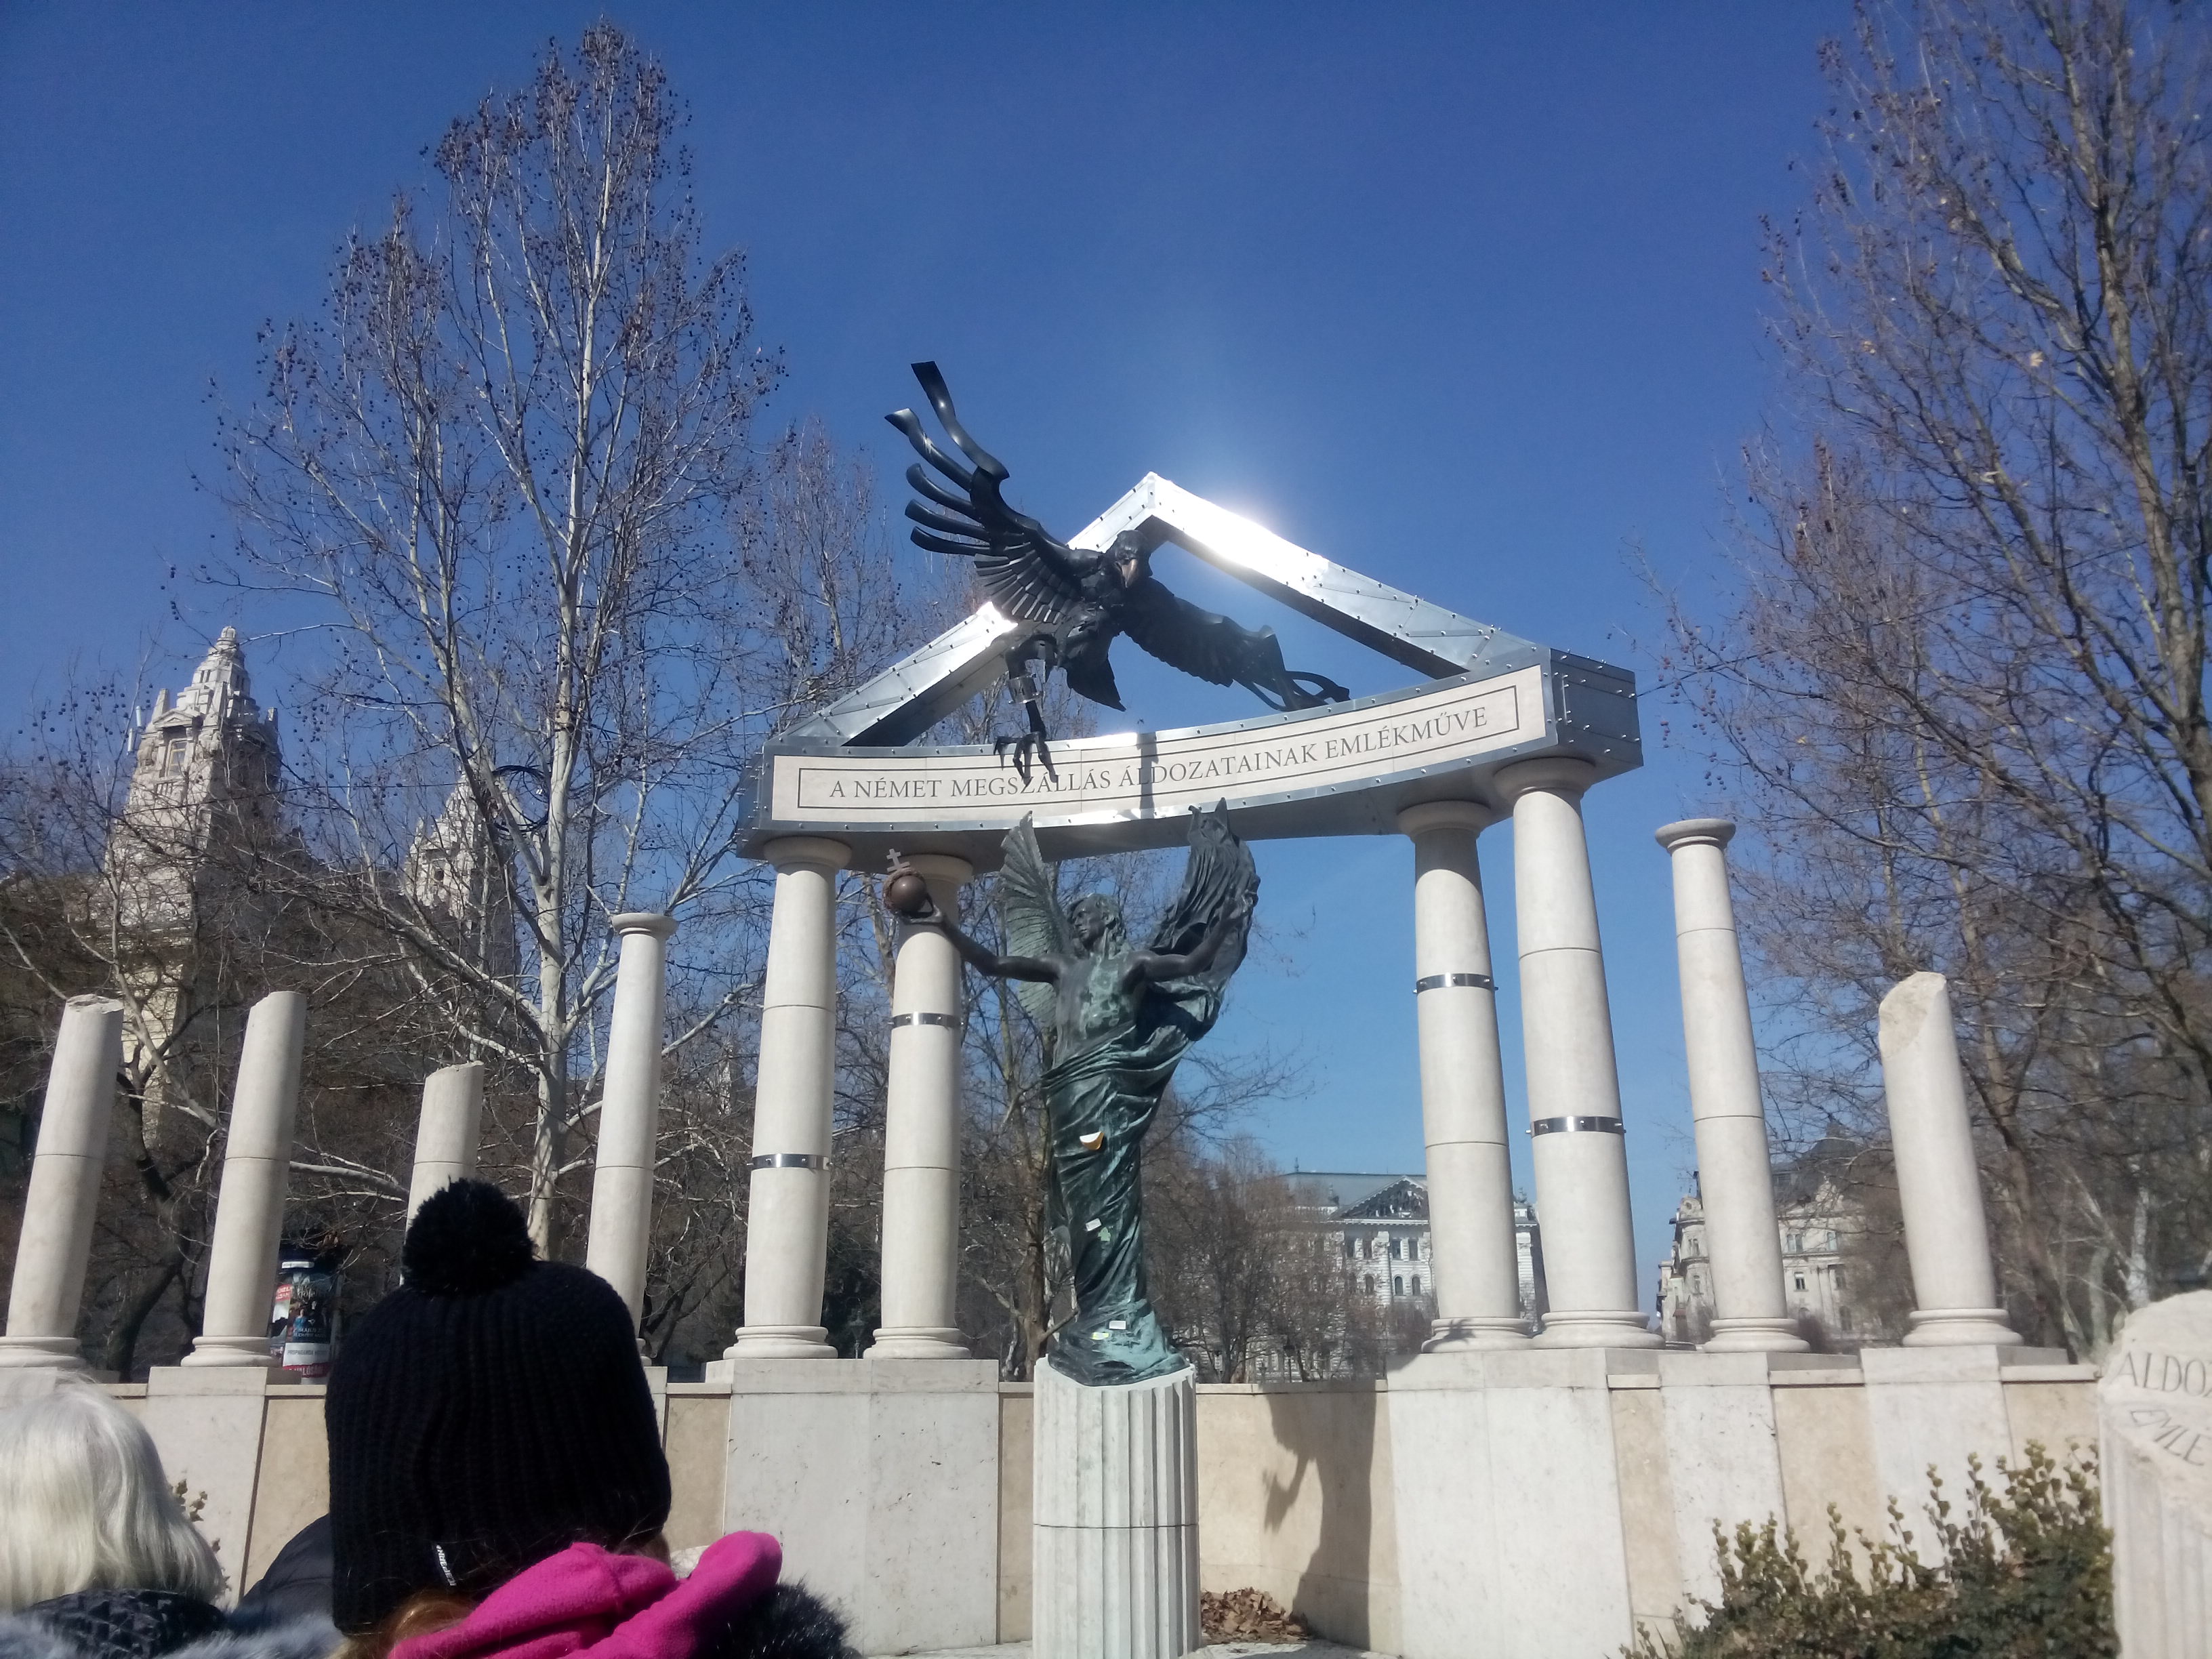 A metal statue of an eagle on top of white stone pillars against ablue sky with tress